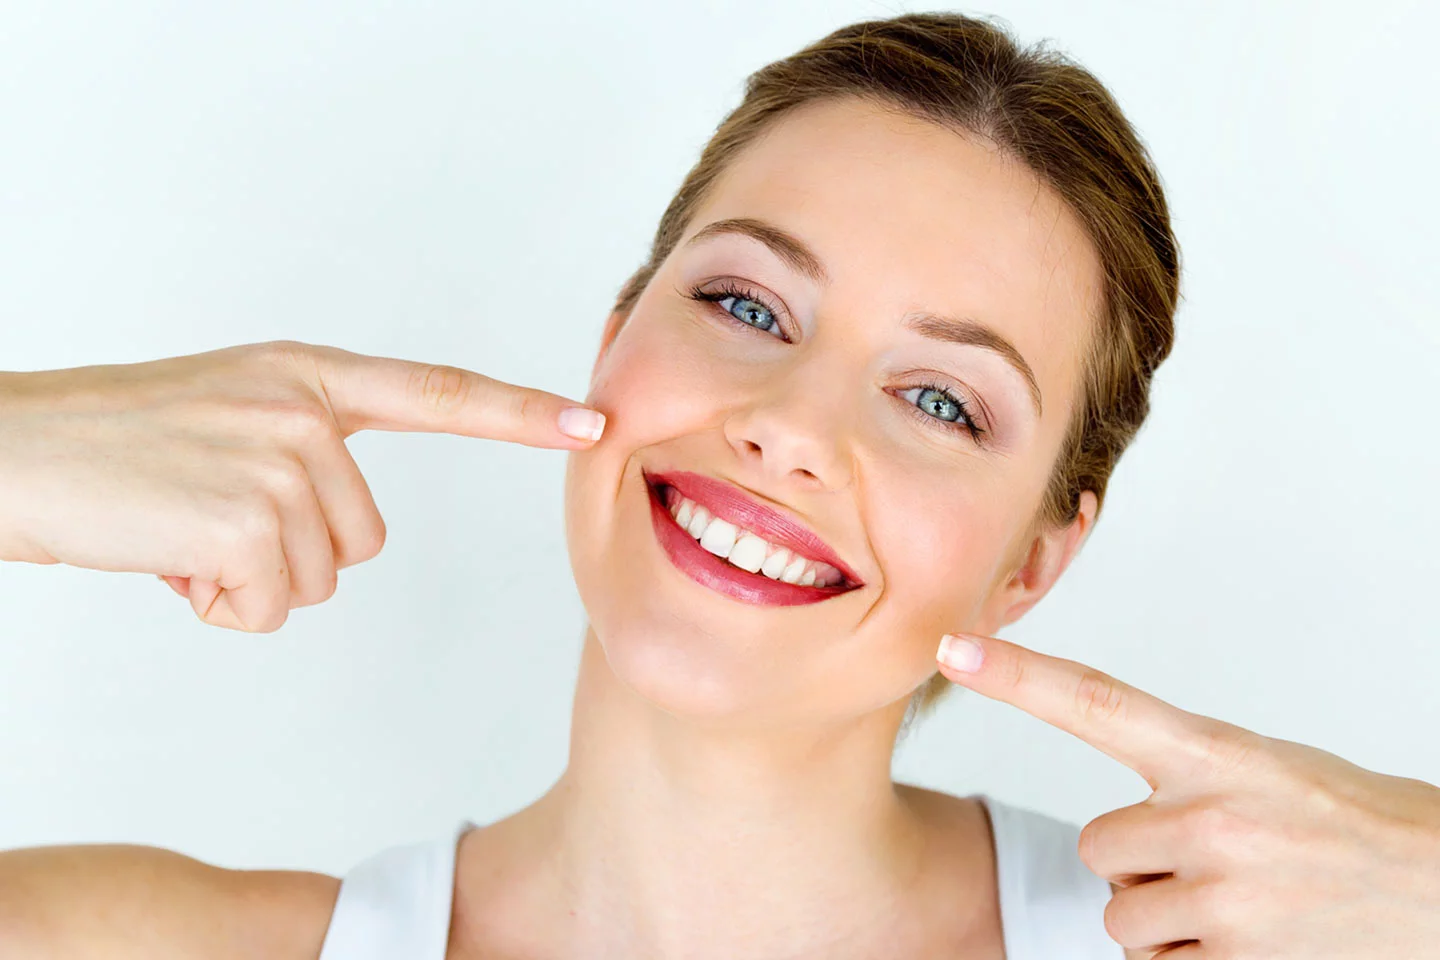 Teeth Whitening Procedures are Available at Ripon Dental